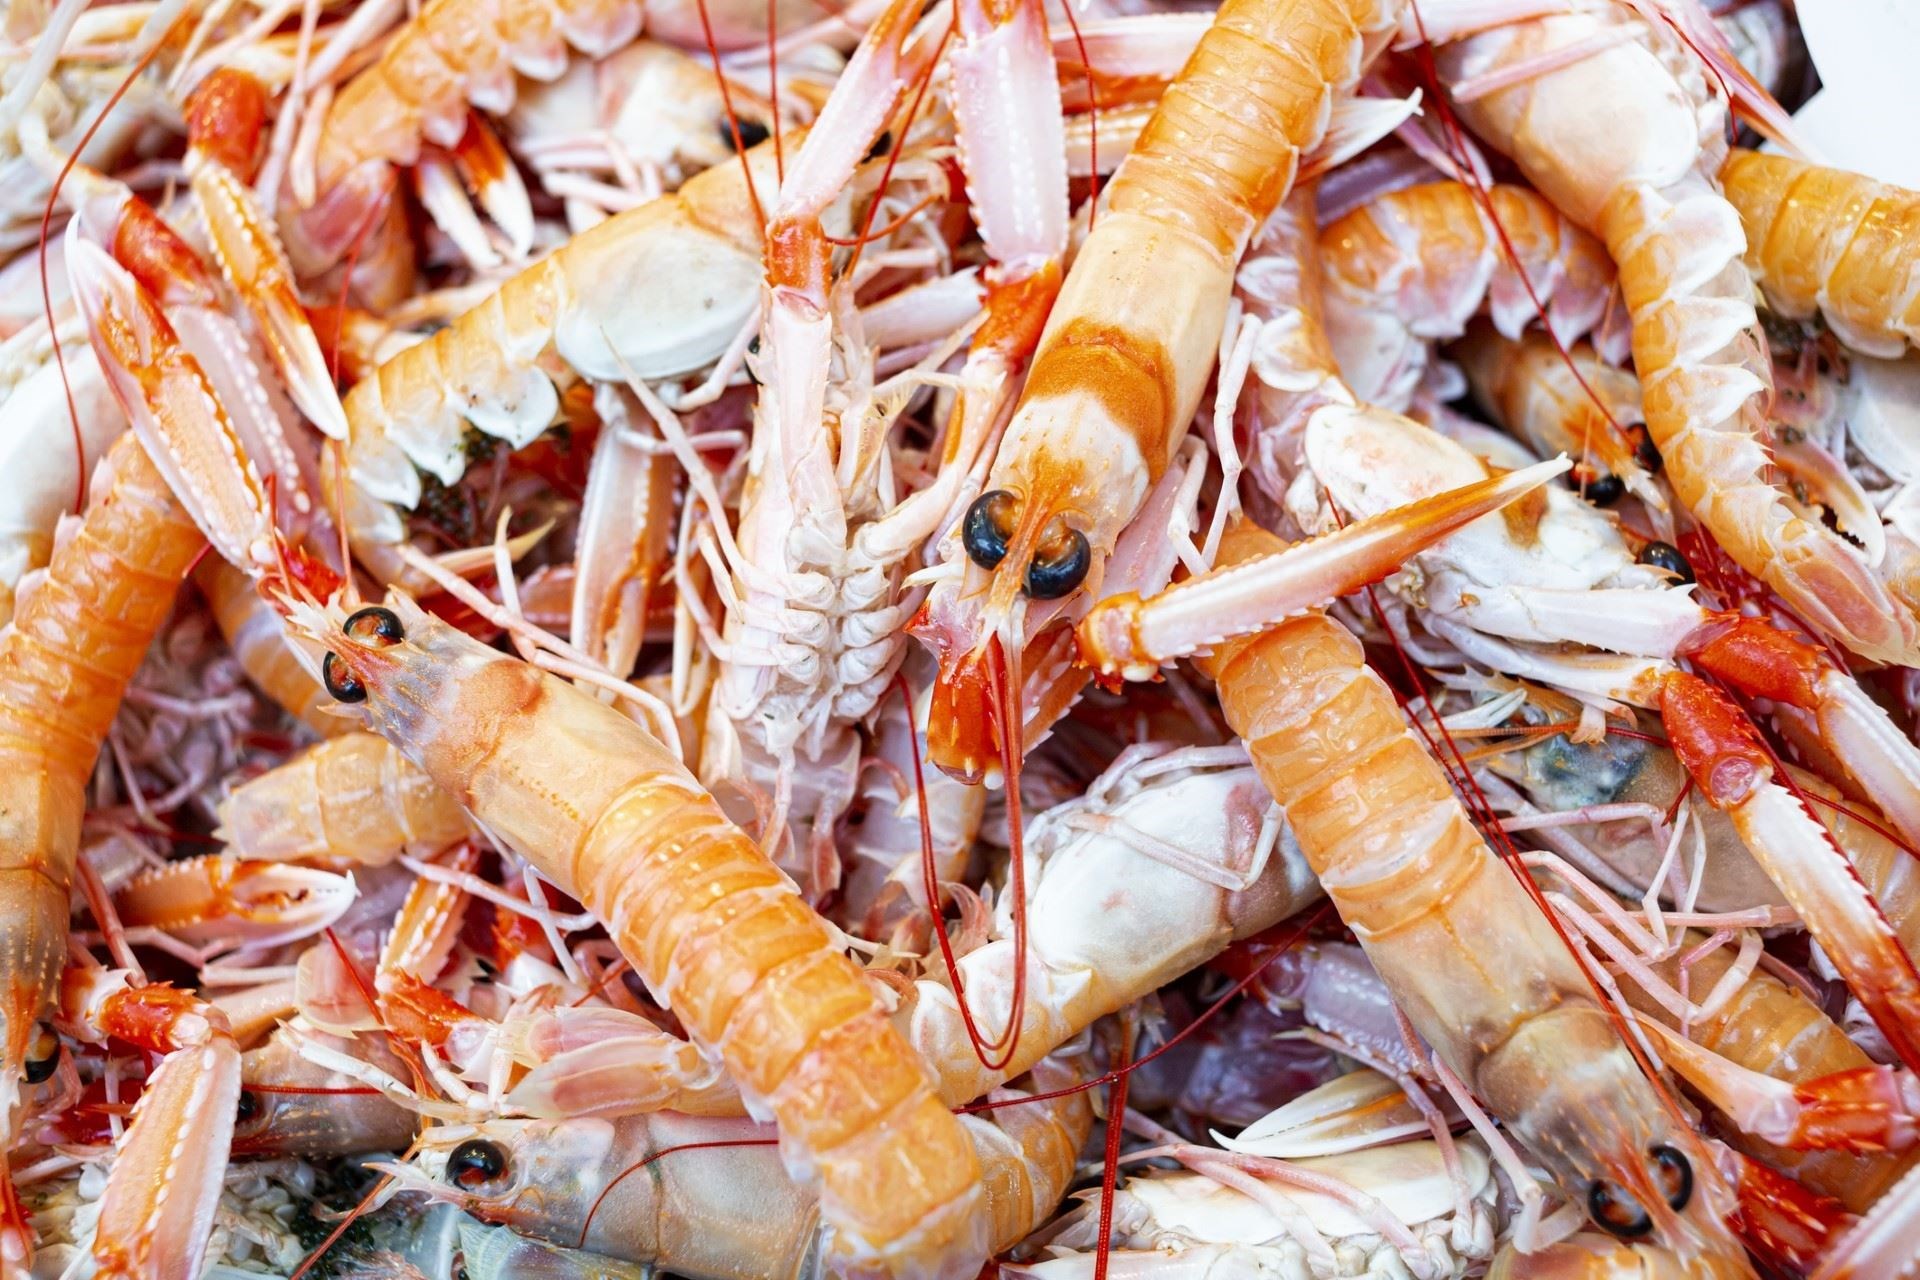 Caught langoustines will be used.